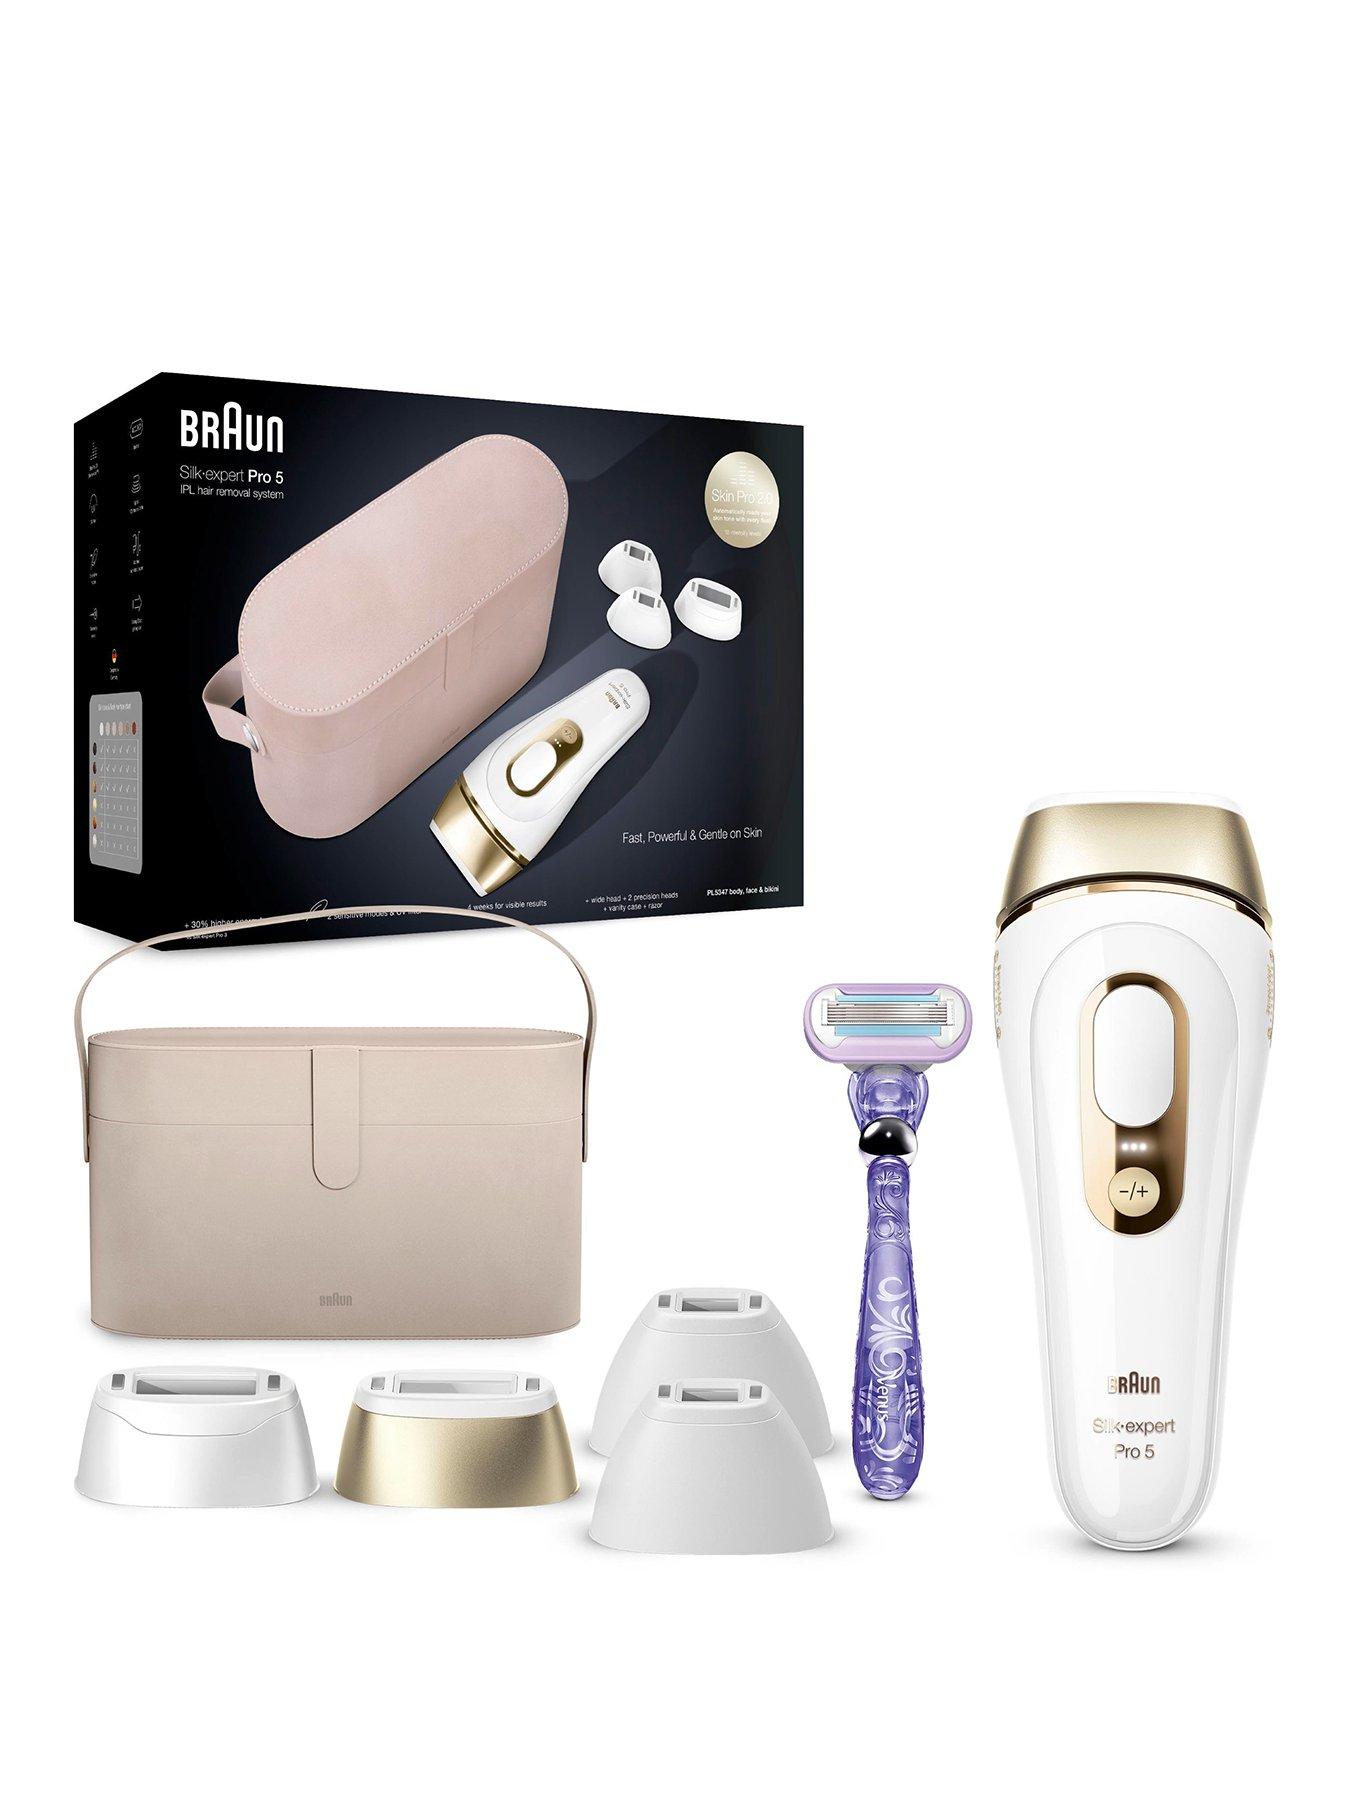 Braun IPL permanent hair removal device review — Blooming